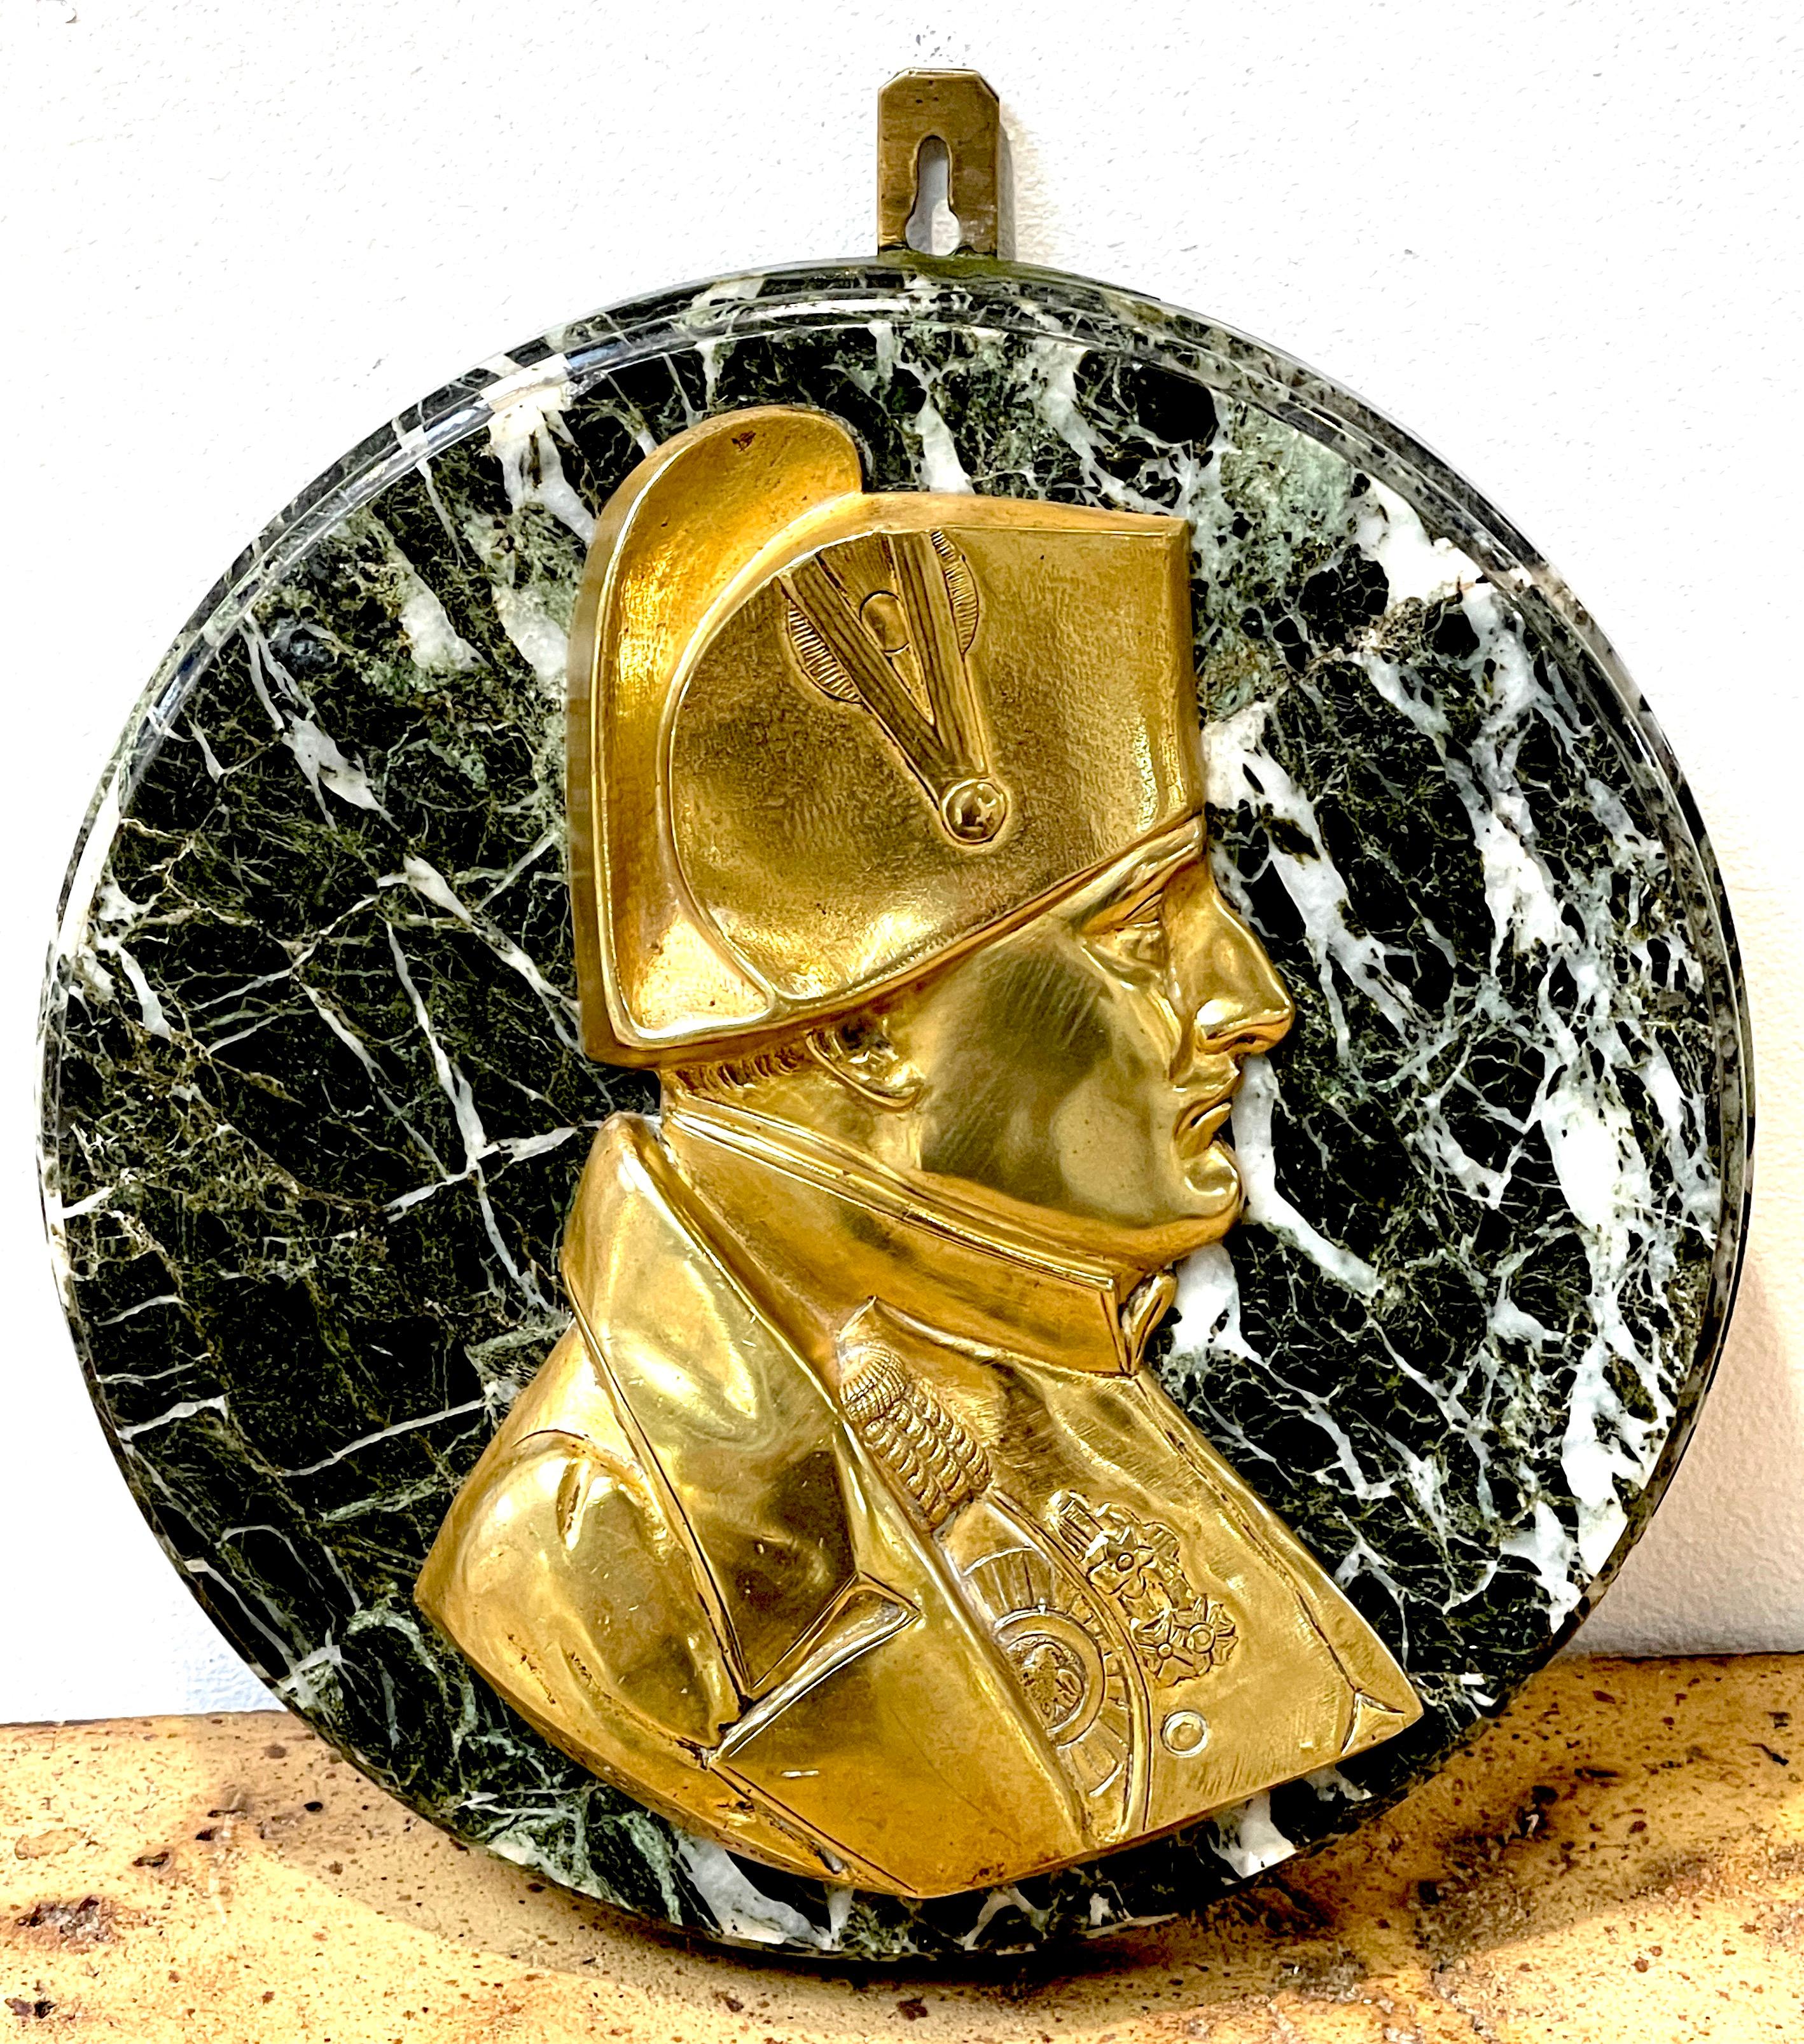 Ormolu and marble portrait plaque of Napoleon, by Pierre Jean David D'Anger
Pierre Jean David D'Anger (1788 - 1856), French Sculptor
The sculpted essence of French history and artistry with this exquisite ormolu and marble portrait plaque of